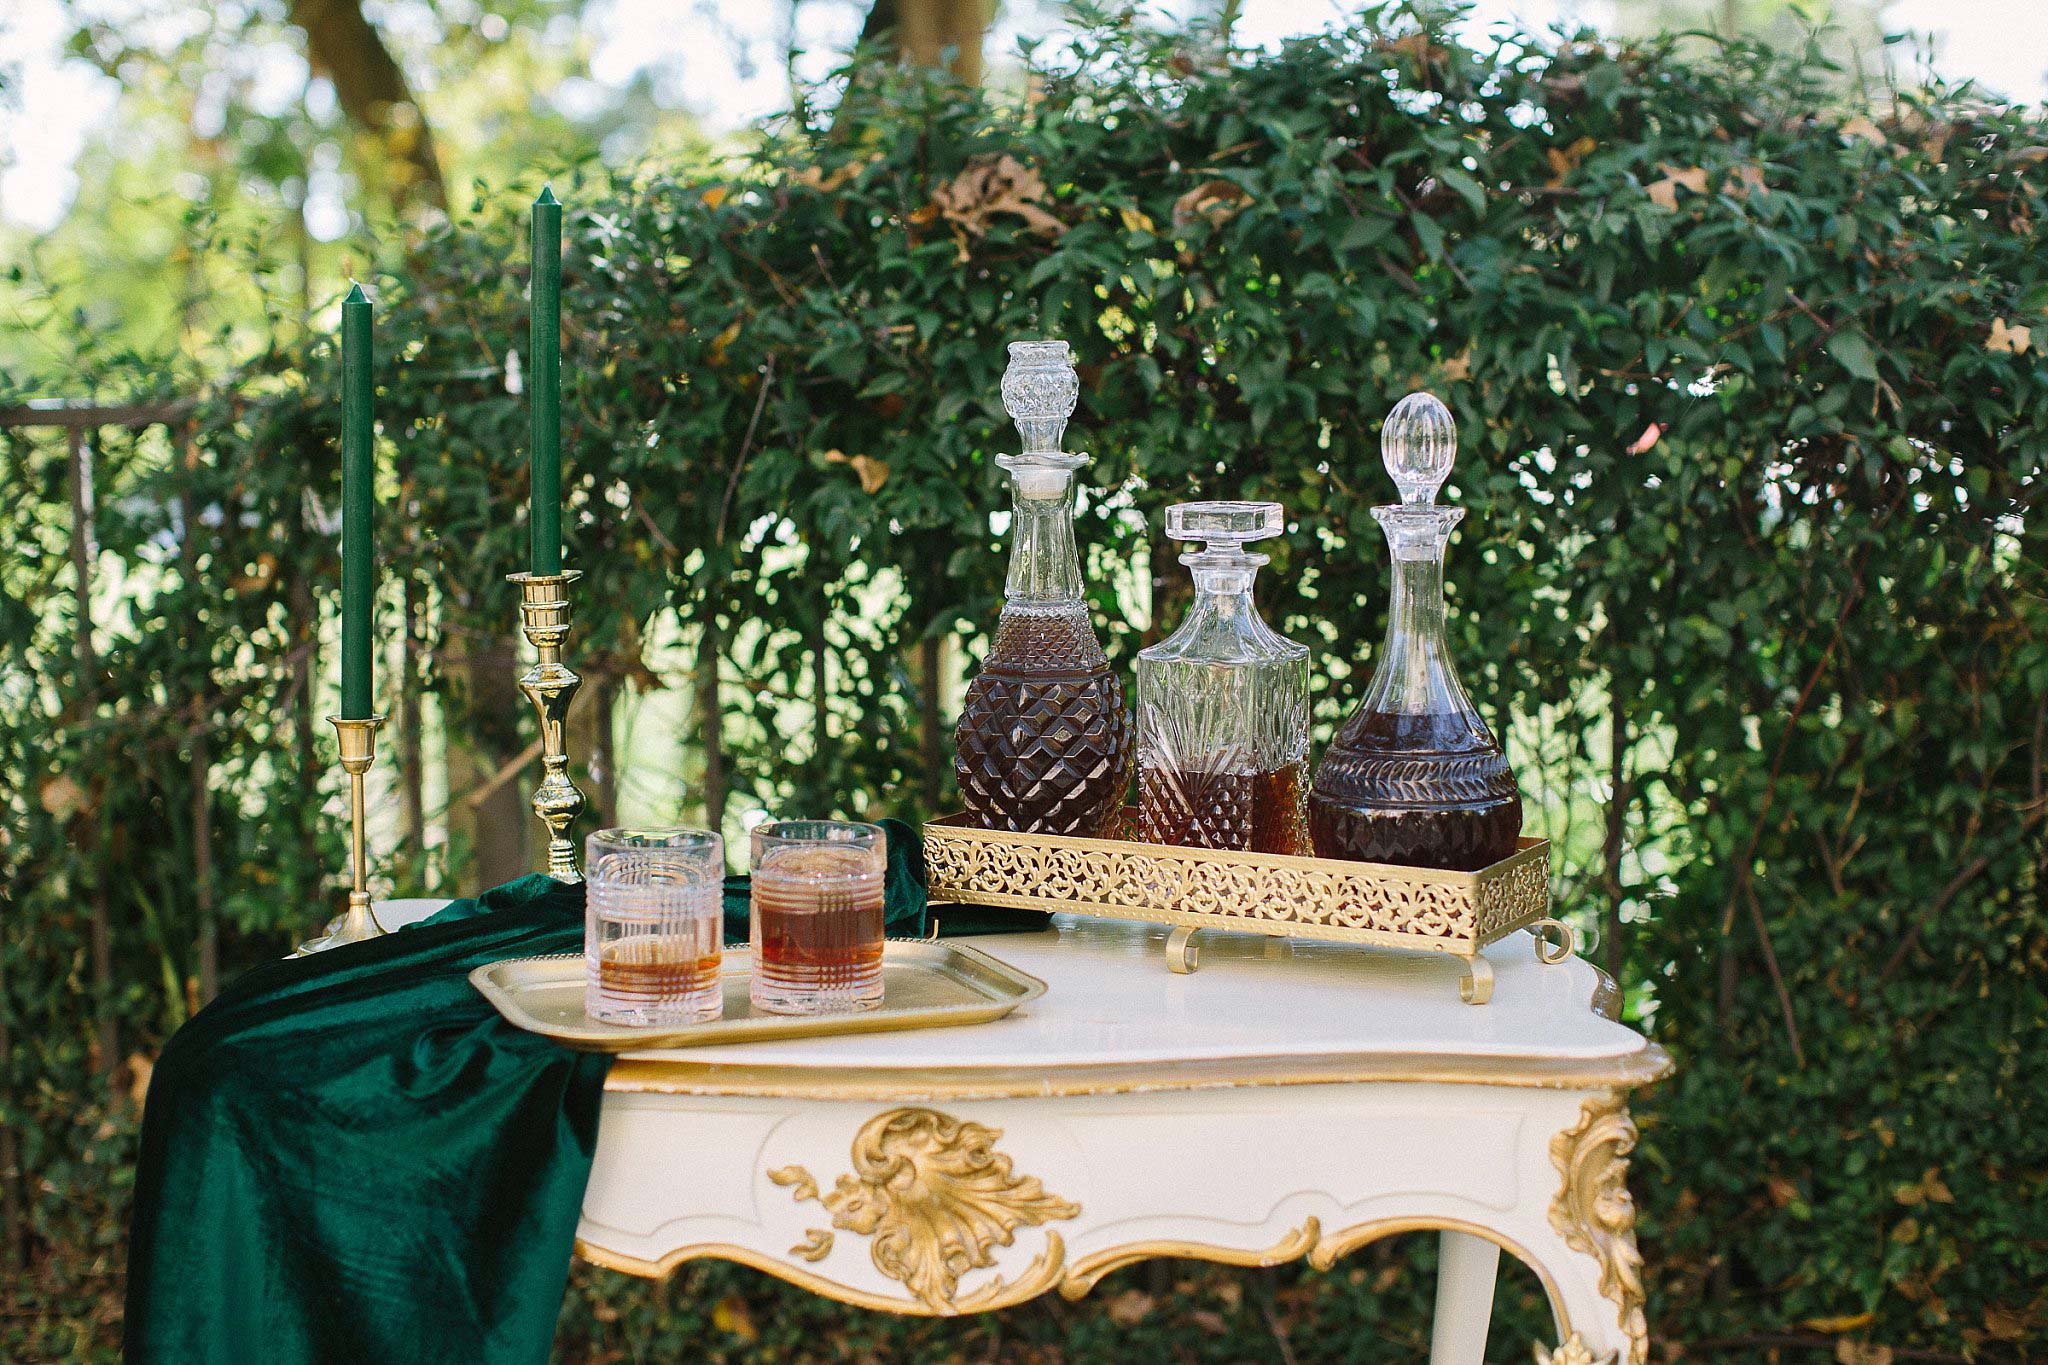 aristide mansfield wedding whiskey bar on white and gold table